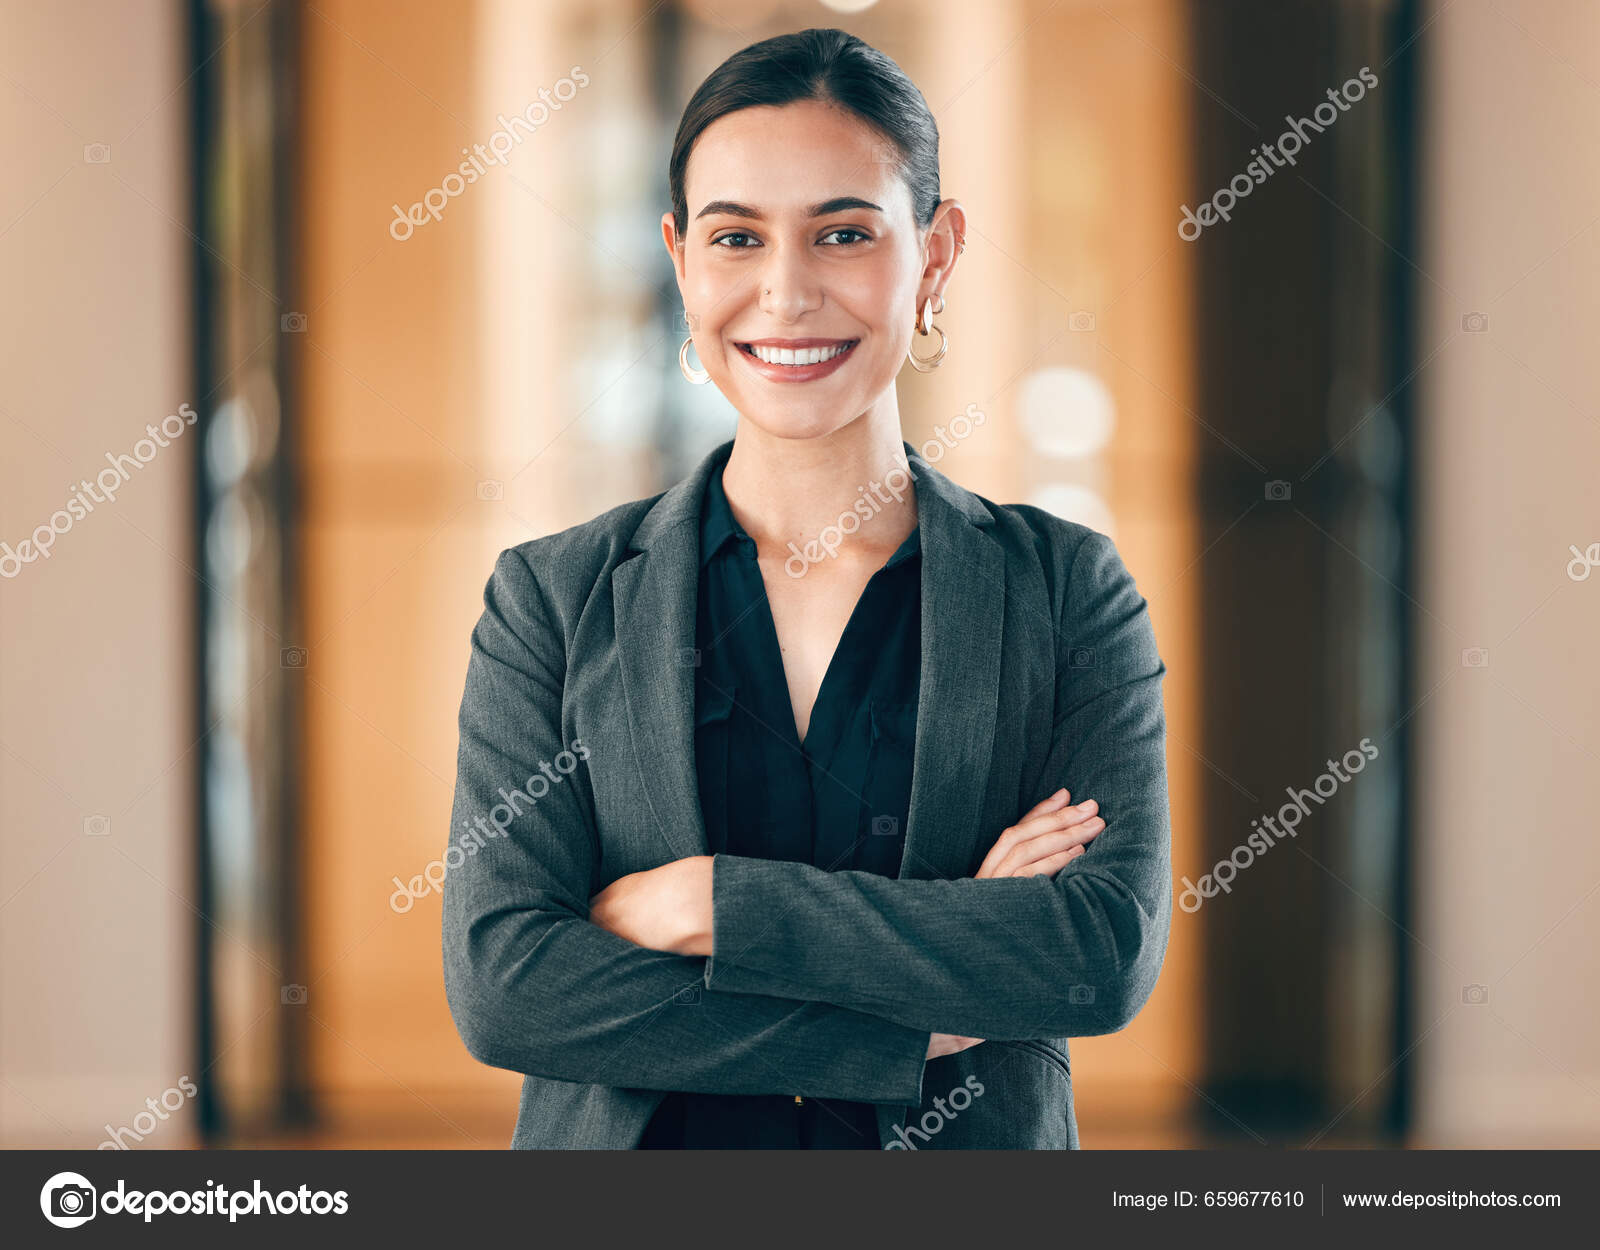 Professional Woman Arms Crossed Stock Photo - Image of